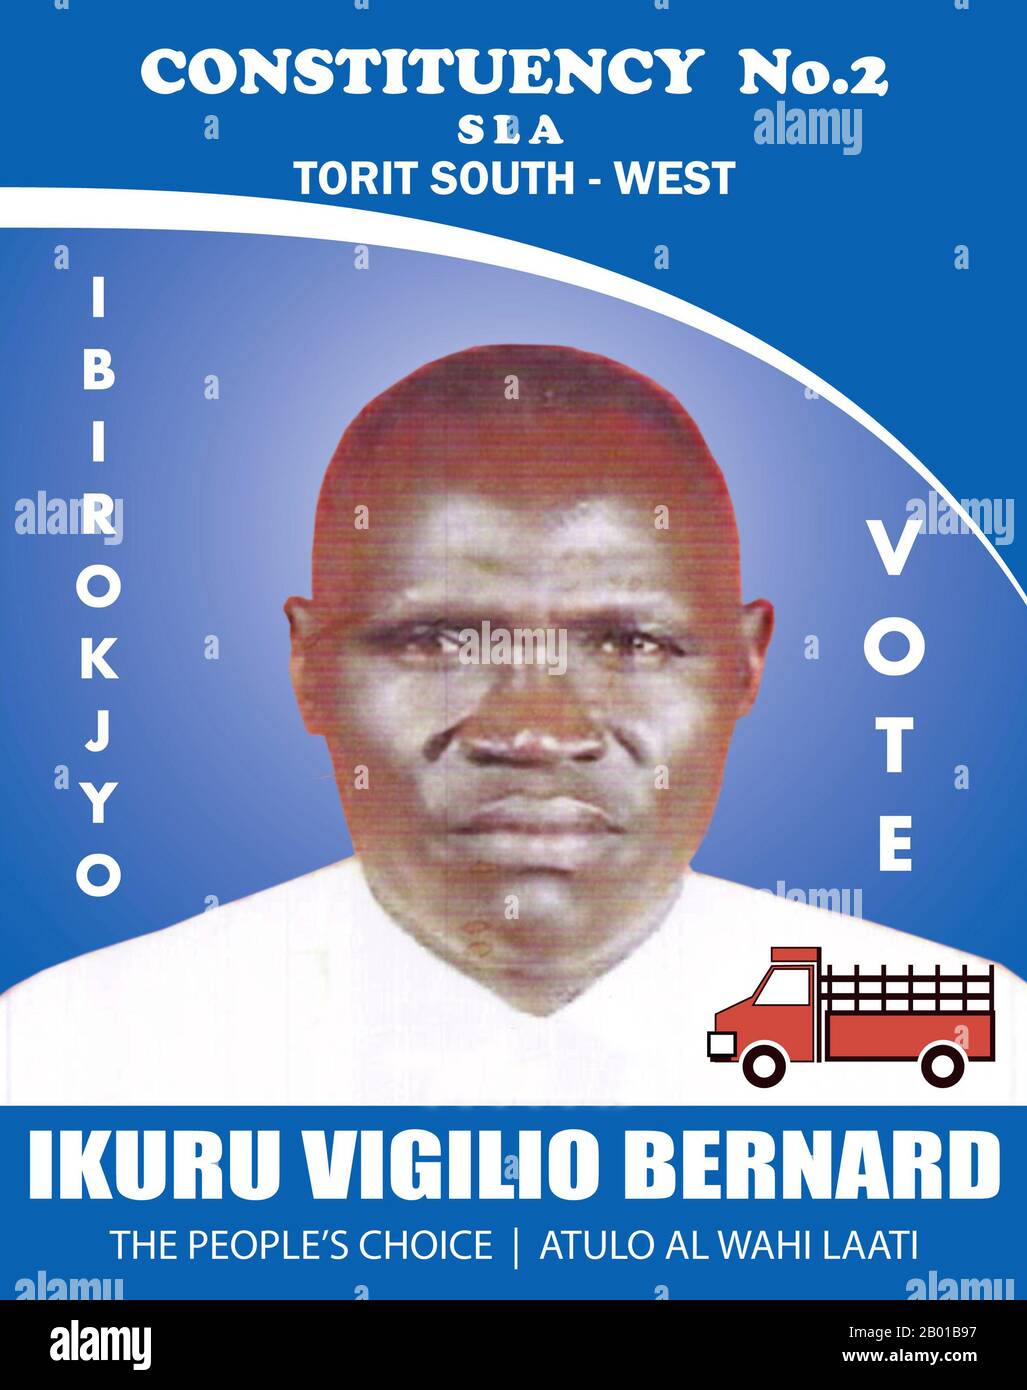 South Sudan: SPLA election poster for Torit South-West, 2011.  Torit is the capital of Eastern Equatoria State and the seat of Imatong county in South Sudan. Torit district was formed in 1934 by the merging of the districts of Teretenya and Opari. Opari was the district administrative headquarters' for the regions inhabited by the ethnic Lotuko (Otuho) Madi and Acholi people.  Torit was badly affected by the violence of the Second Sudanese Civil War and conflict with the Lord's Resistance Army. Much of its former population is still internally displaced within South Sudan. Stock Photo